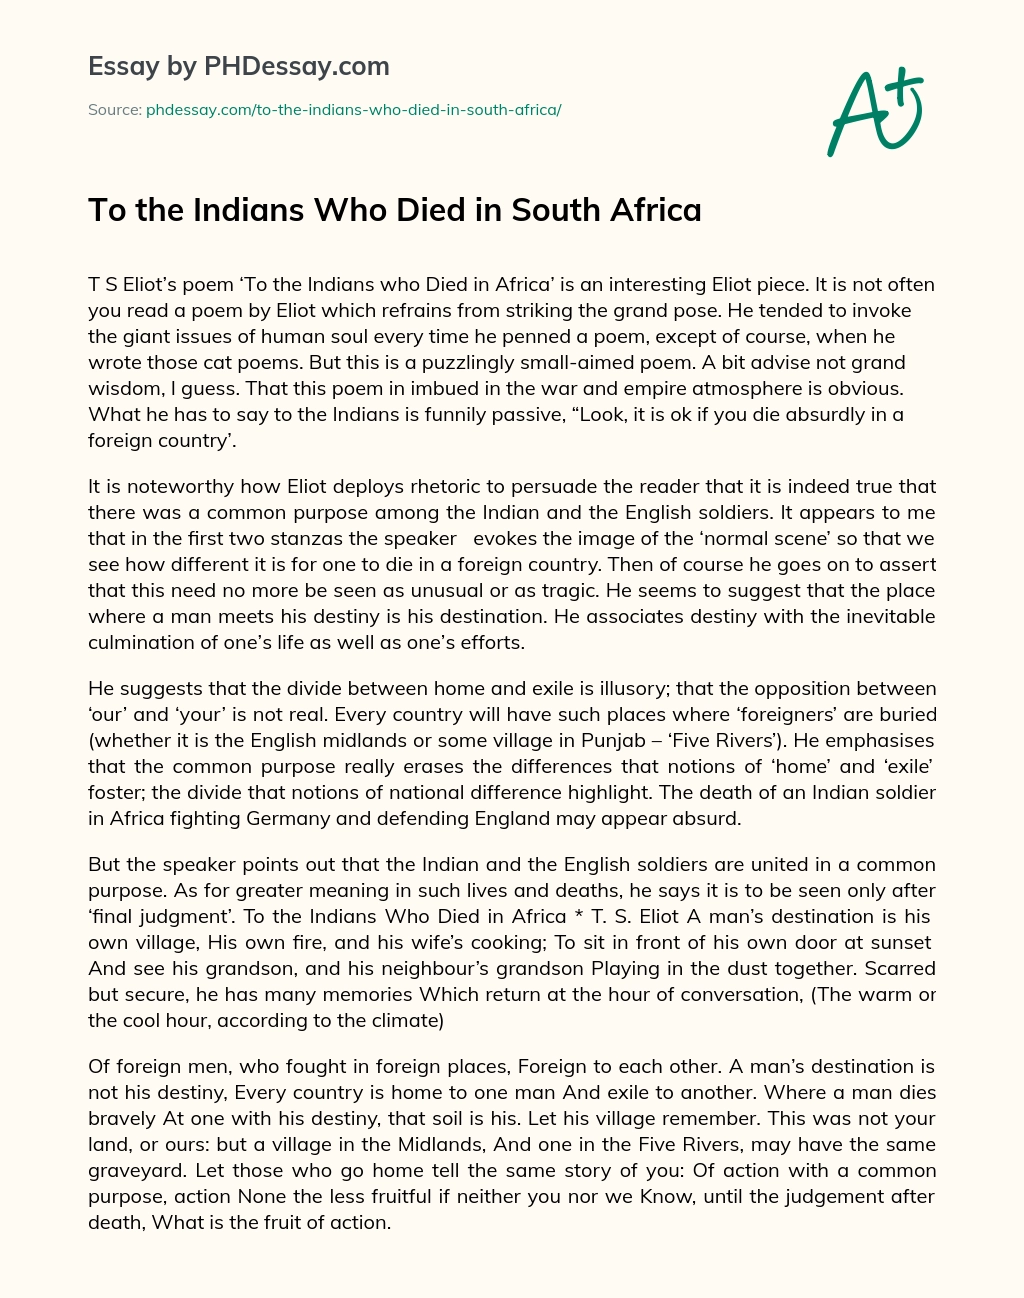 To the Indians Who Died in South Africa essay